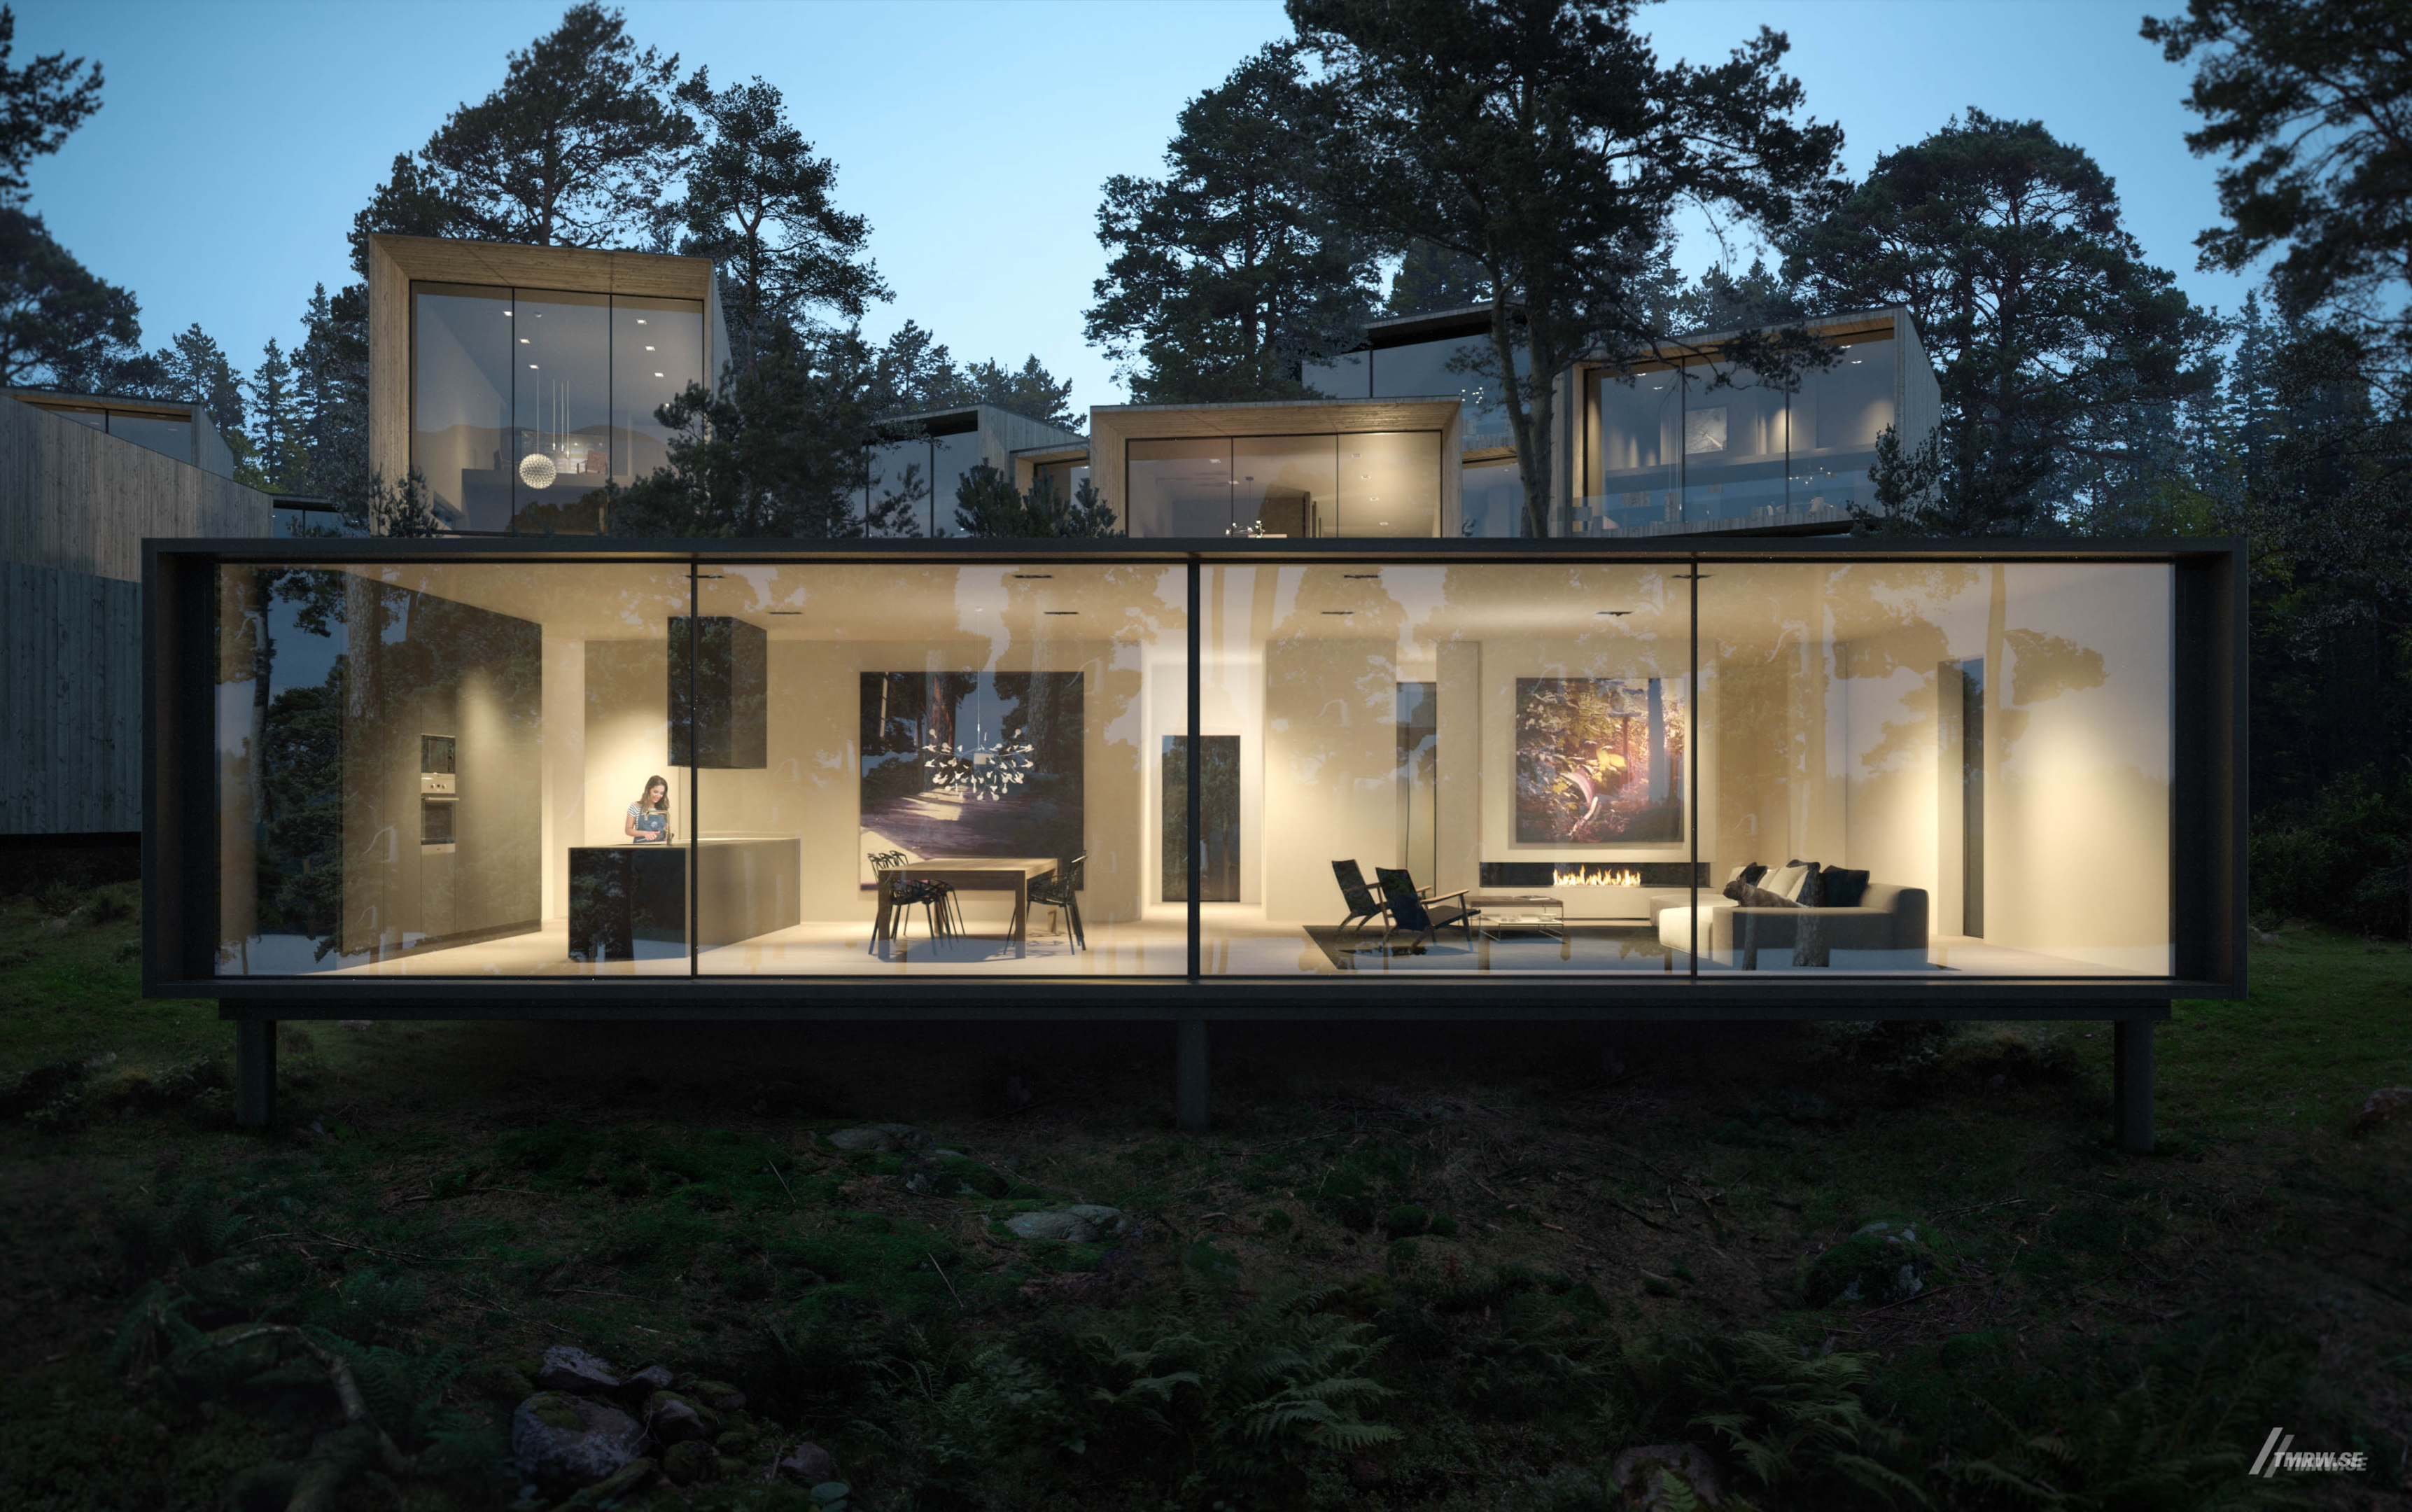 Architectural visualization of Lännersta for Imola a modern rectangle shaped house in evening light form an eye view.